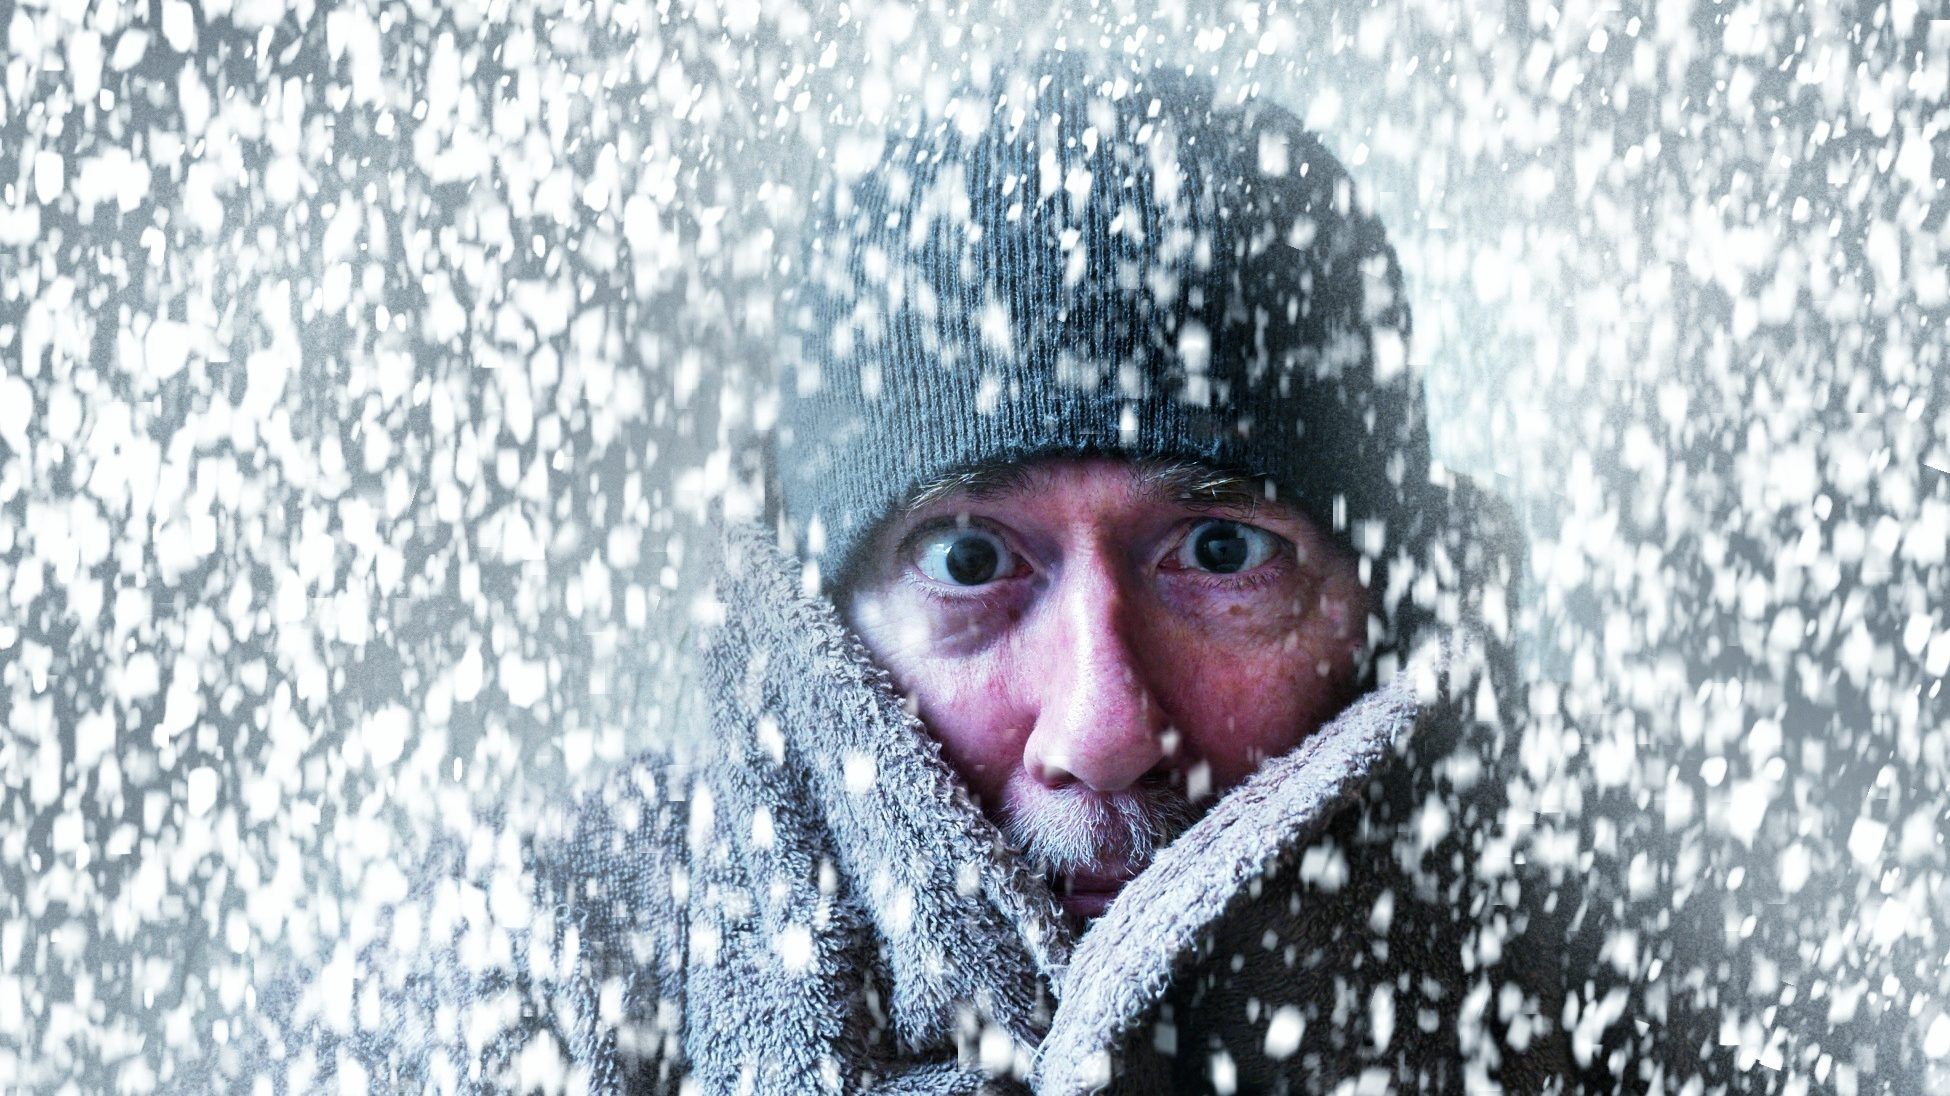 Staying warm can be a challenge in extreme cold, but it's important to reduce your exposure to the elements. GETTY